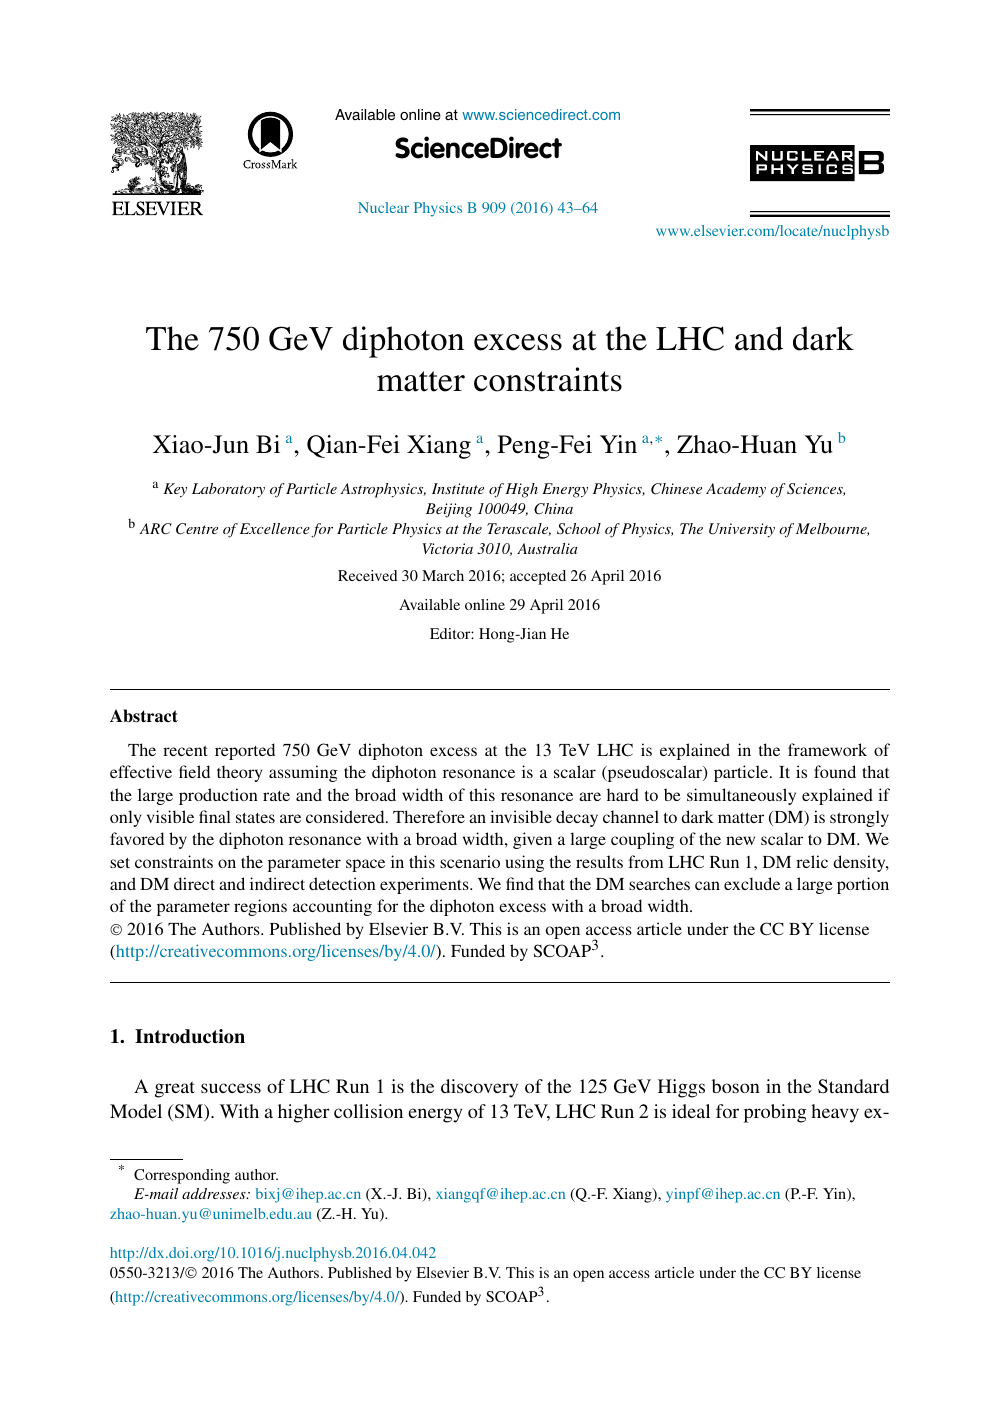 The 750 Gev Diphoton Excess At The Lhc And Dark Matter Constraints Topic Of Research Paper In Physical Sciences Download Scholarly Article Pdf And Read For Free On Cyberleninka Open Science Hub